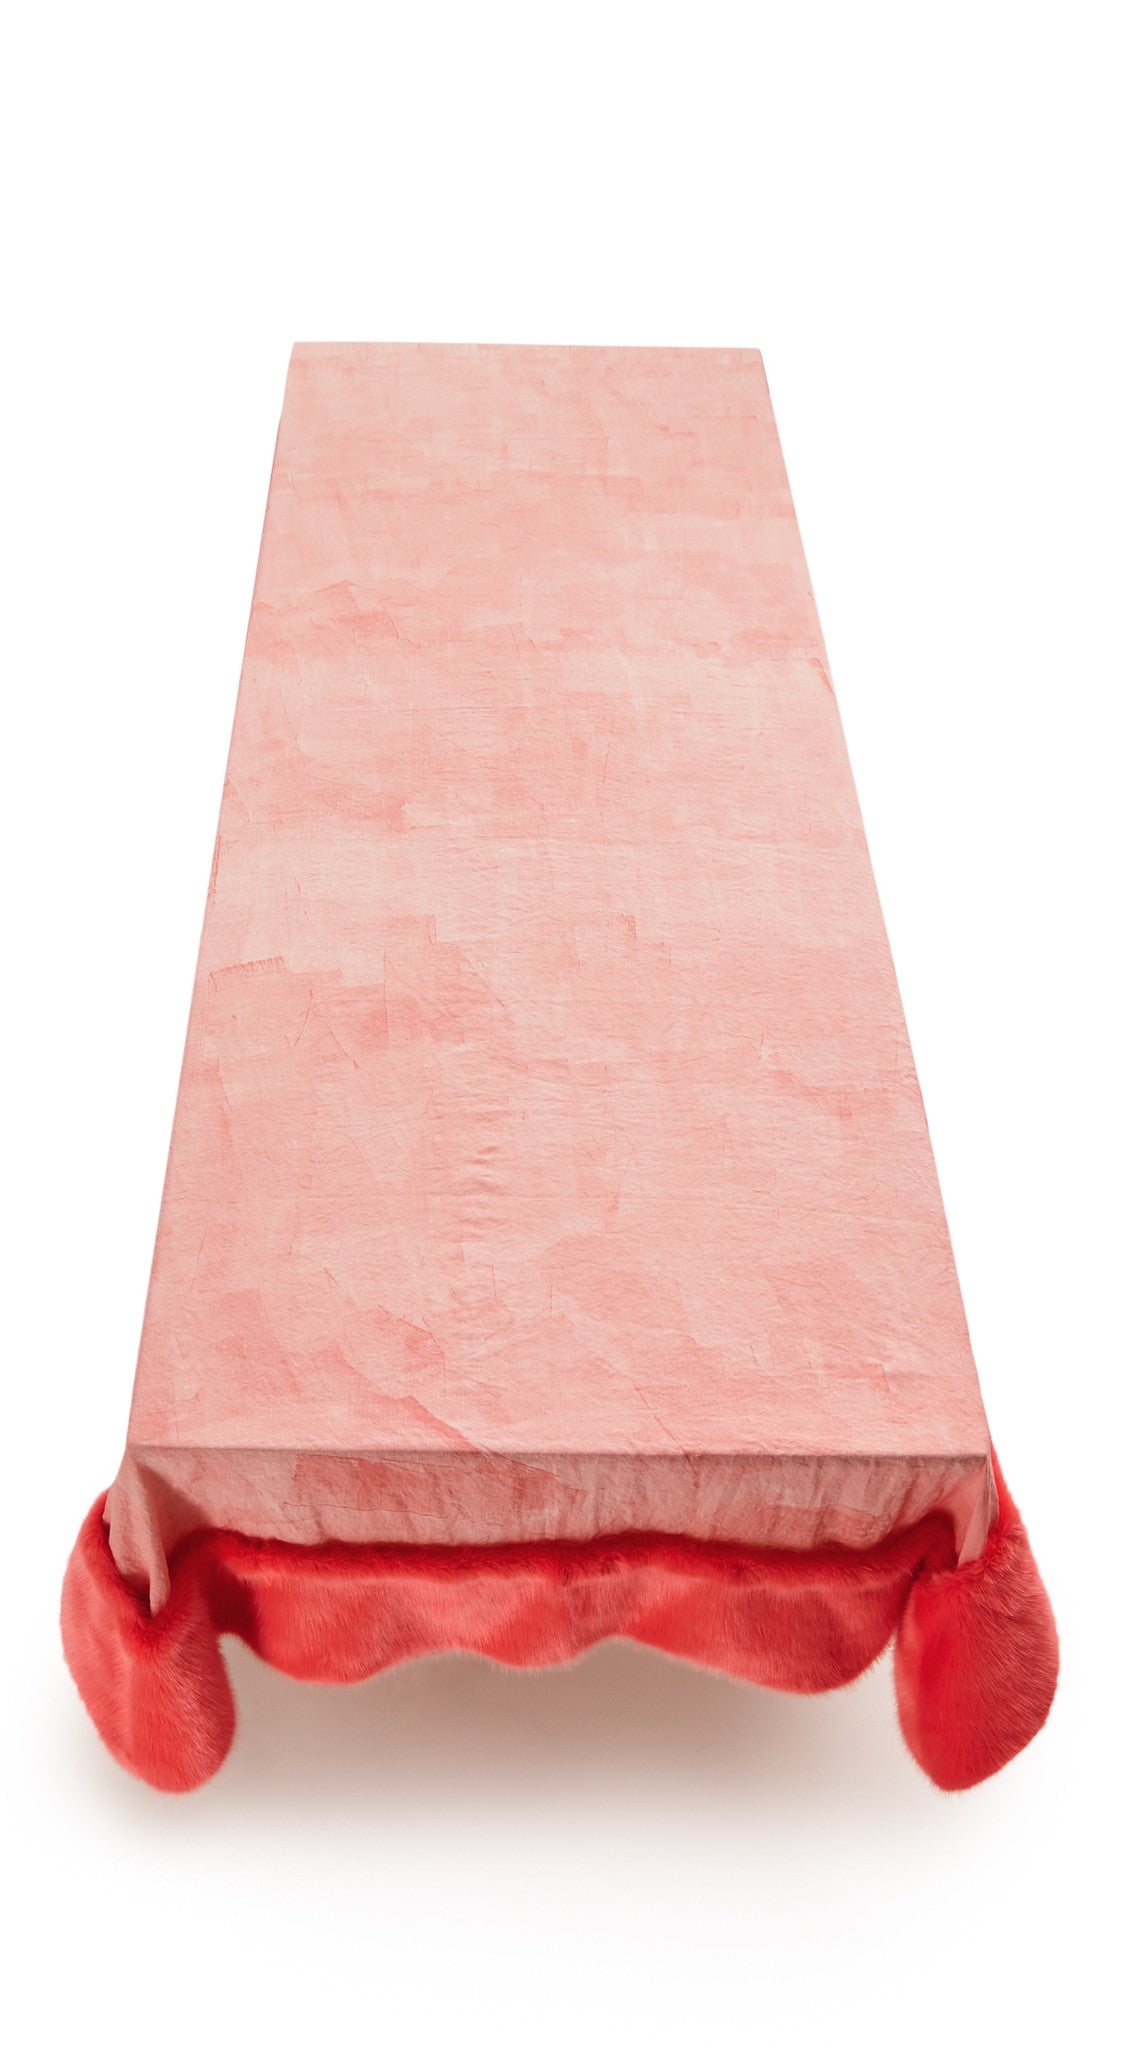 Summerill & Bishop x Shrimps Hand Painted Linen and Faux Fur Tablecloth in Powder Pink